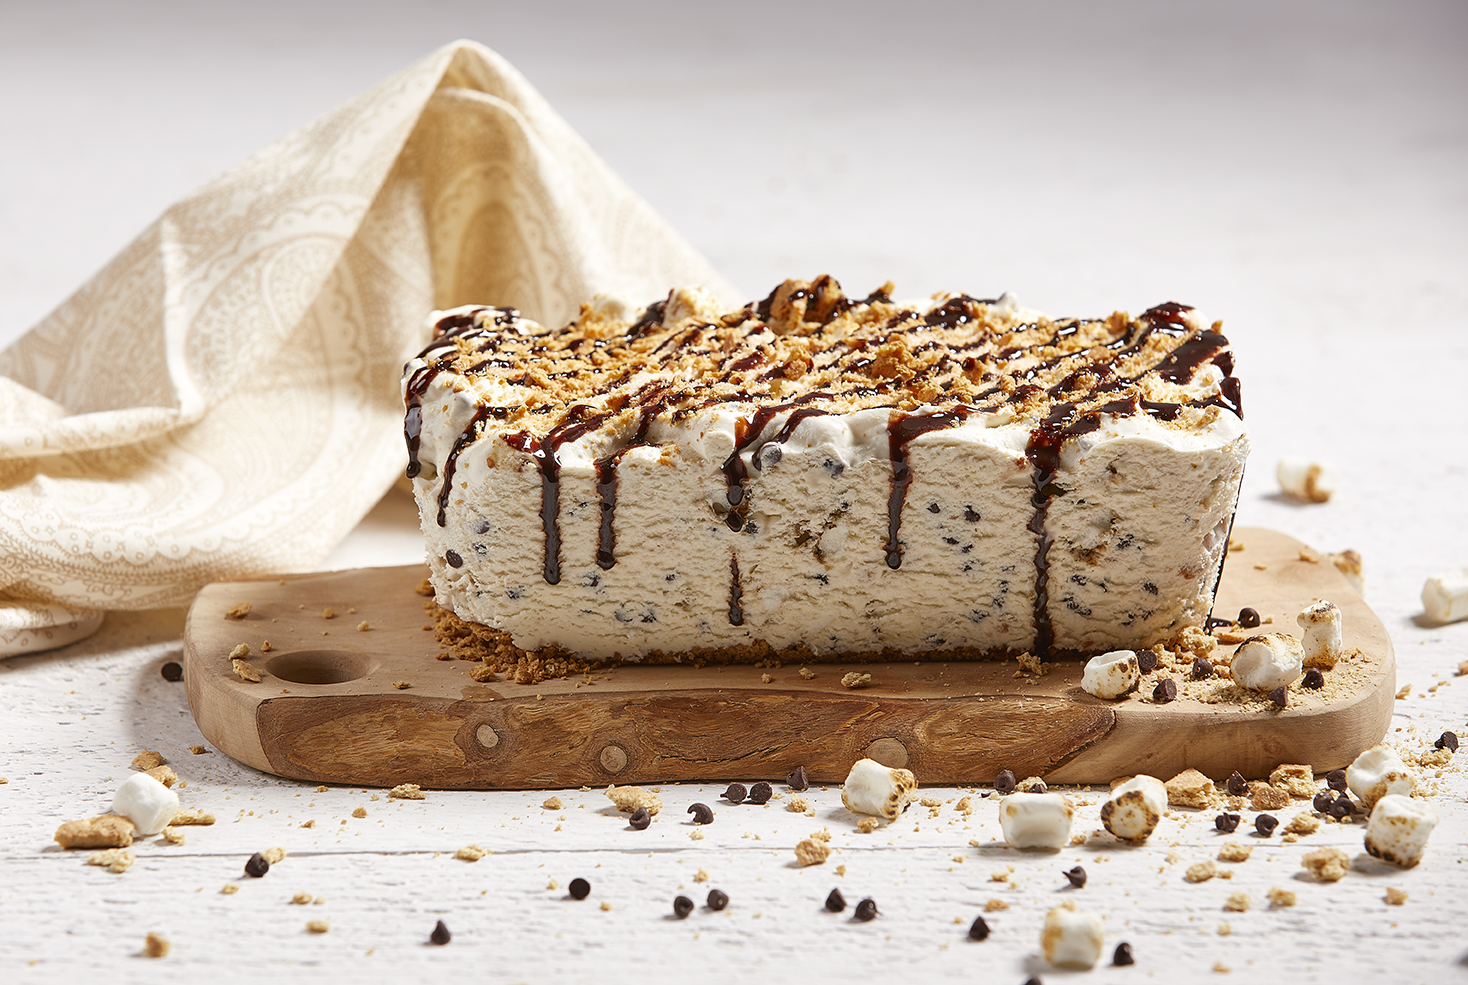 Loaf cake-sized semifreddo topped with toasted marshmallows, graham crumbs and marshmallow sauce on an olive wood board.